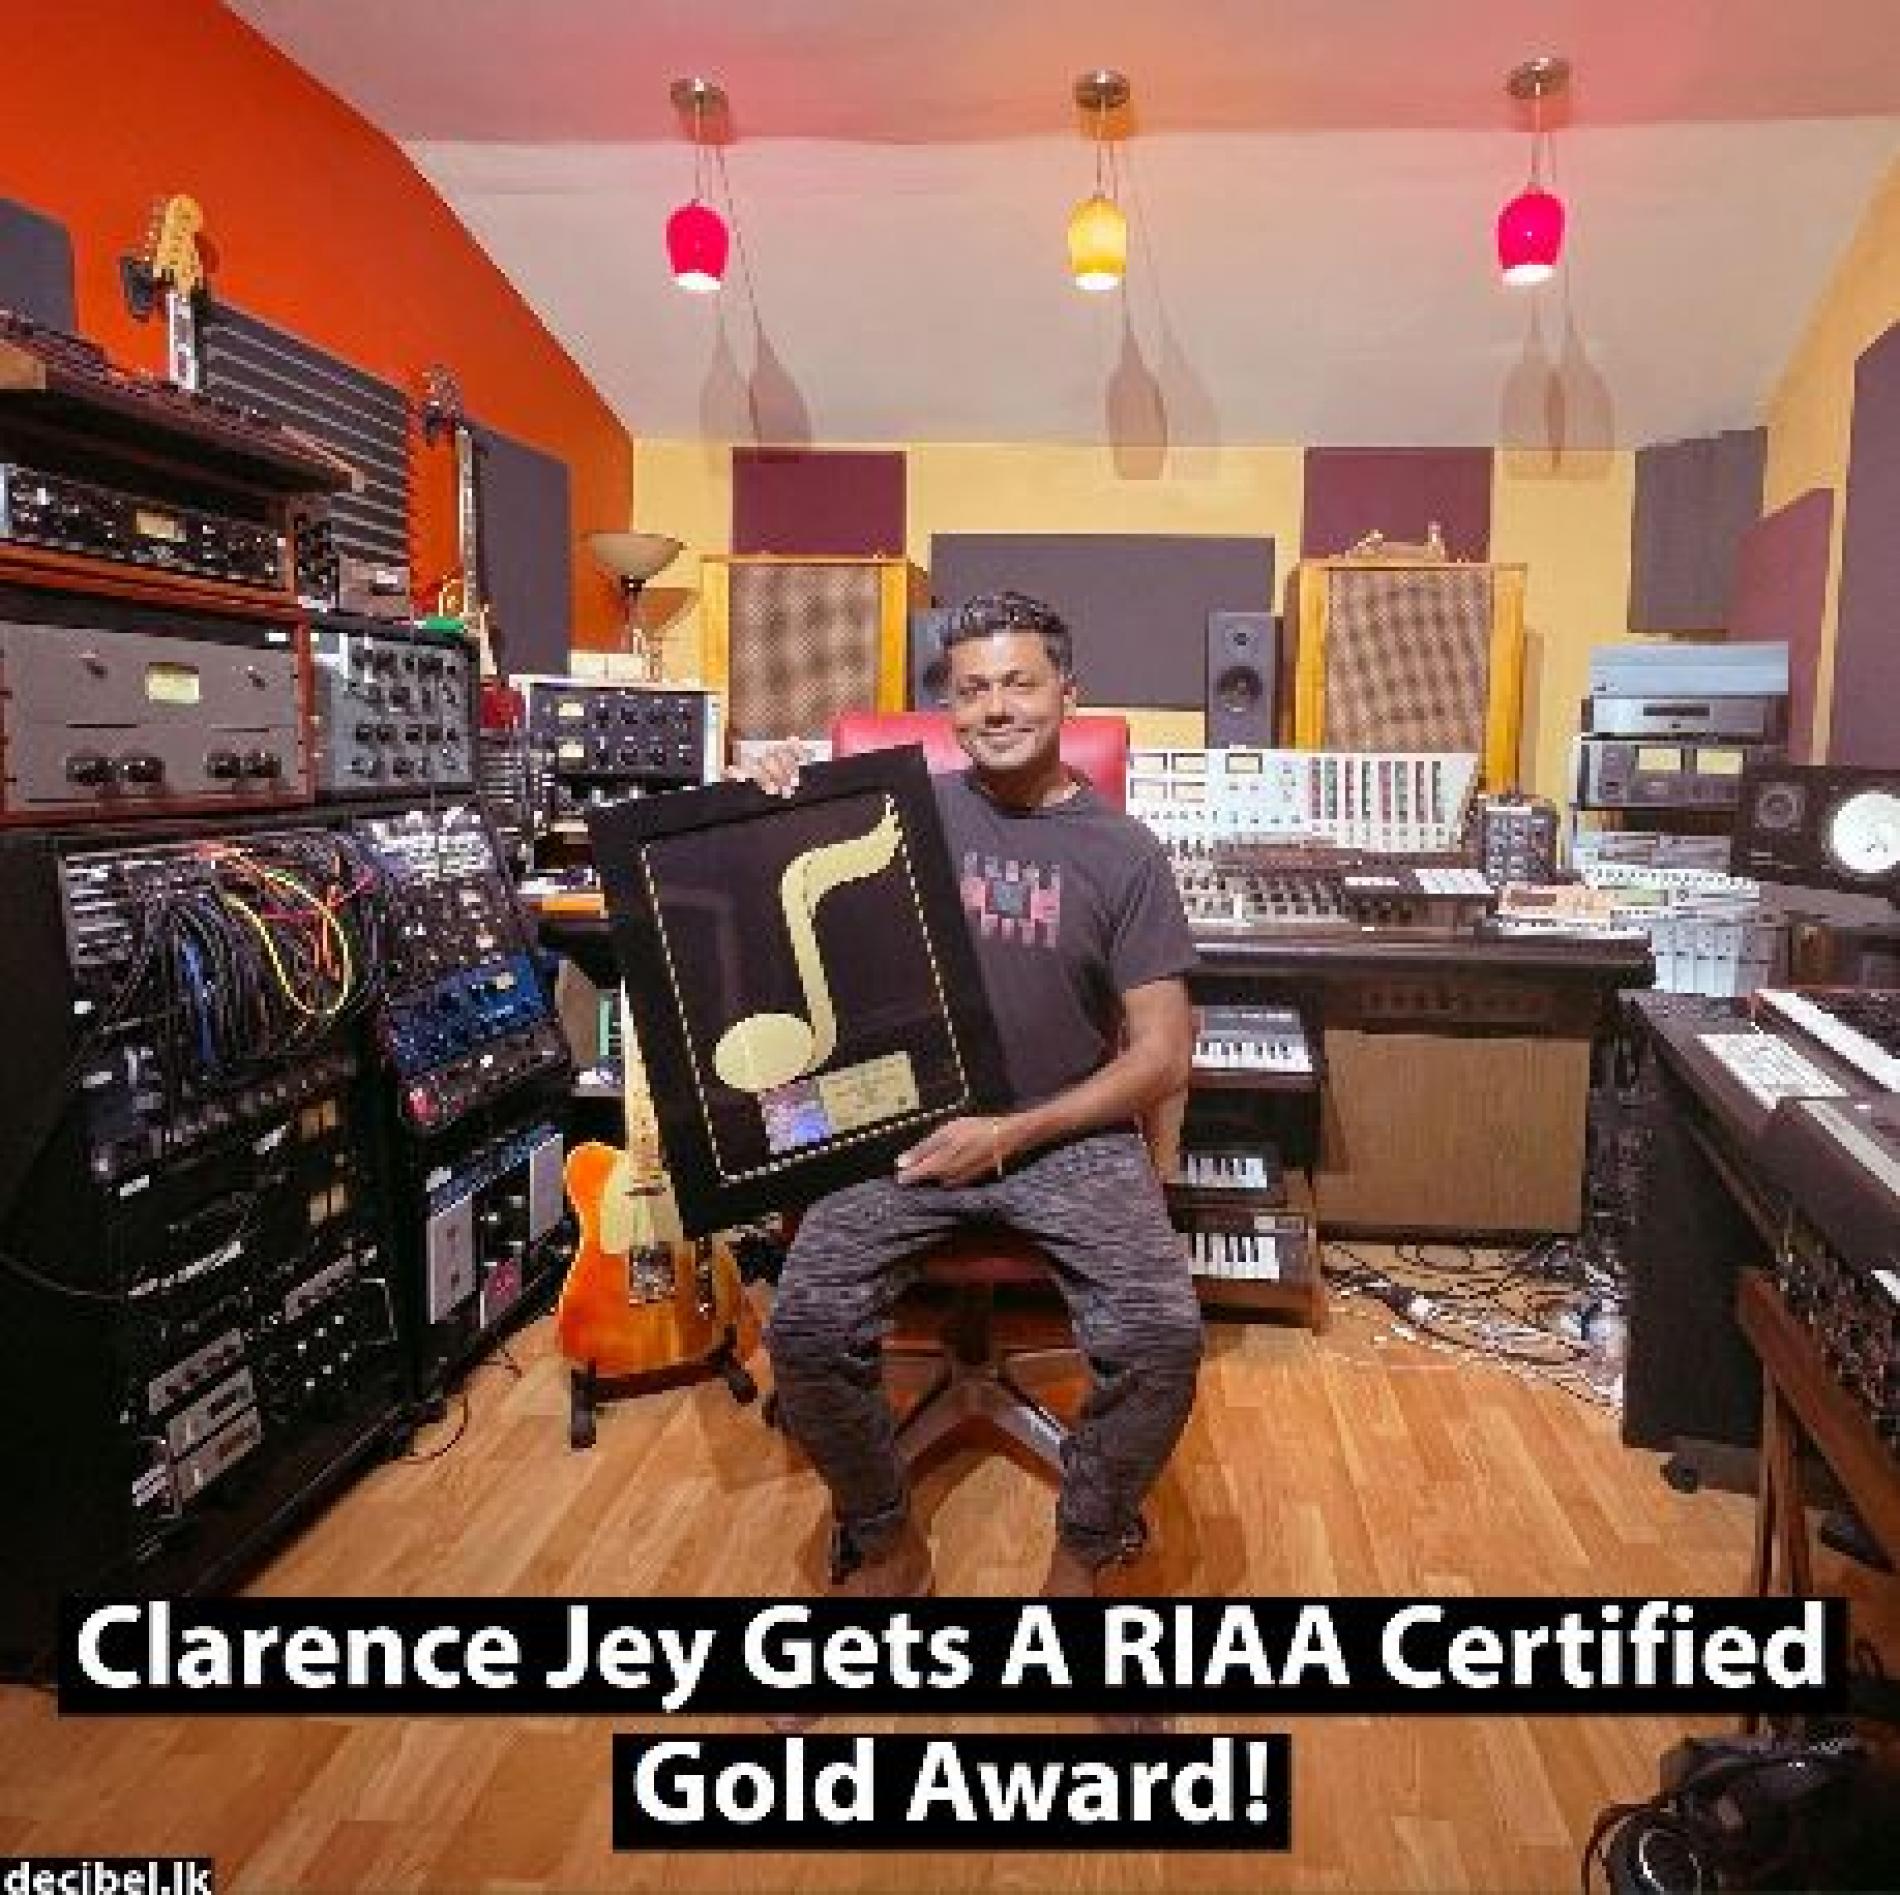 News : Clarence Jey Gets A RIAA Certified Gold Award!